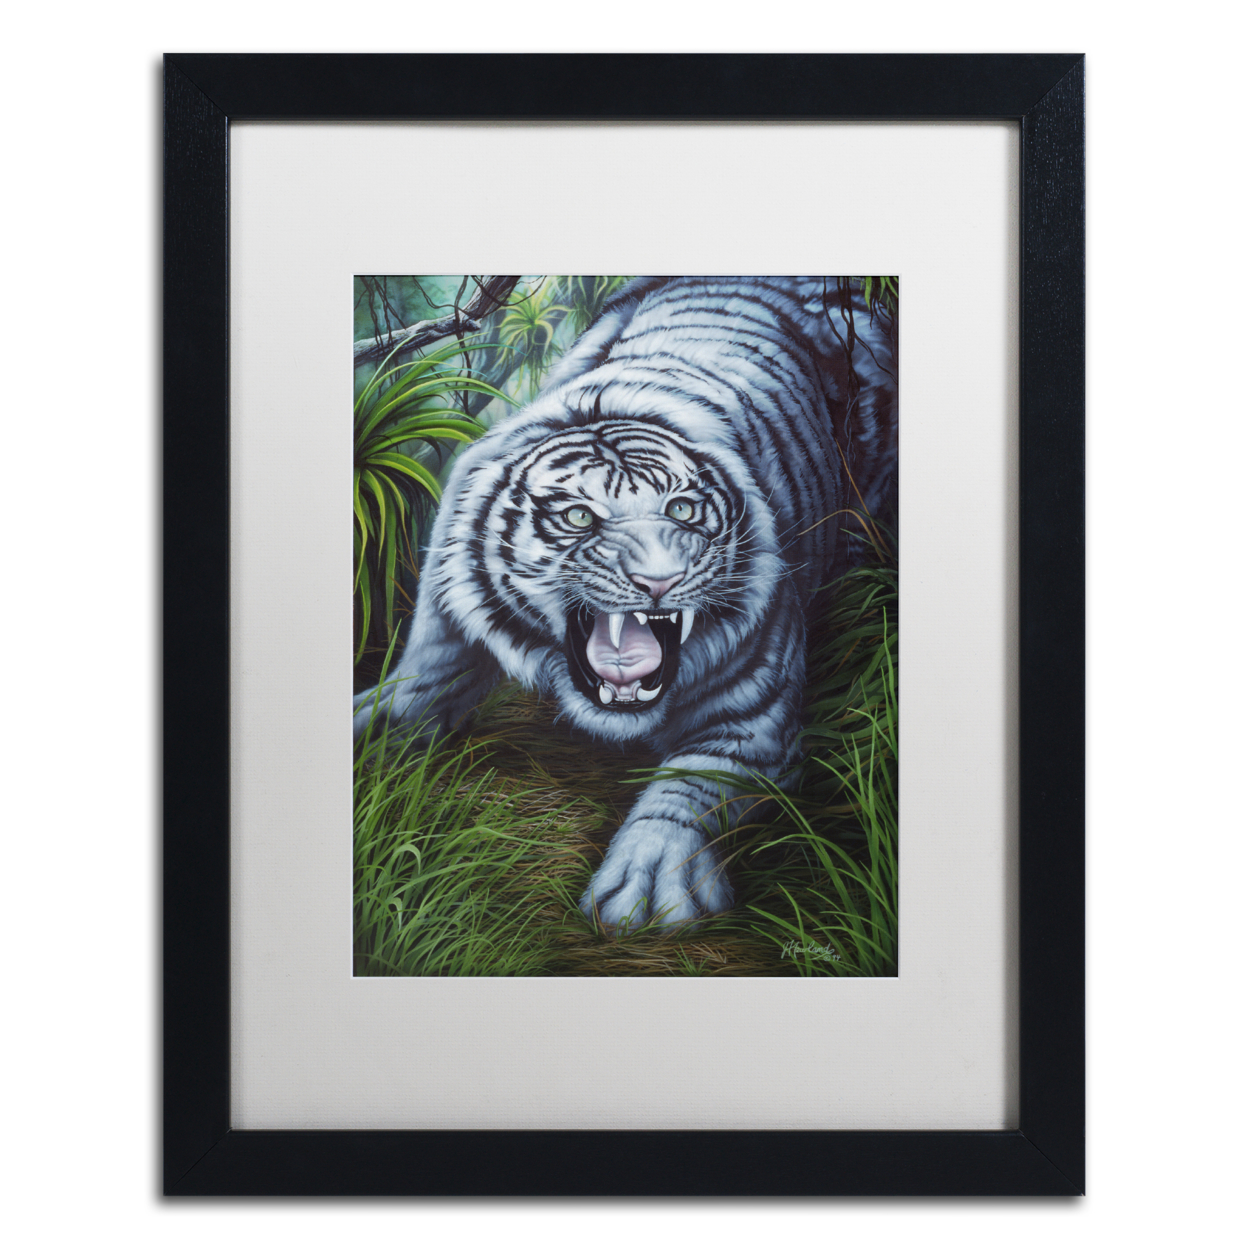 Jenny Newland 'White Tiger' Black Wooden Framed Art 18 X 22 Inches